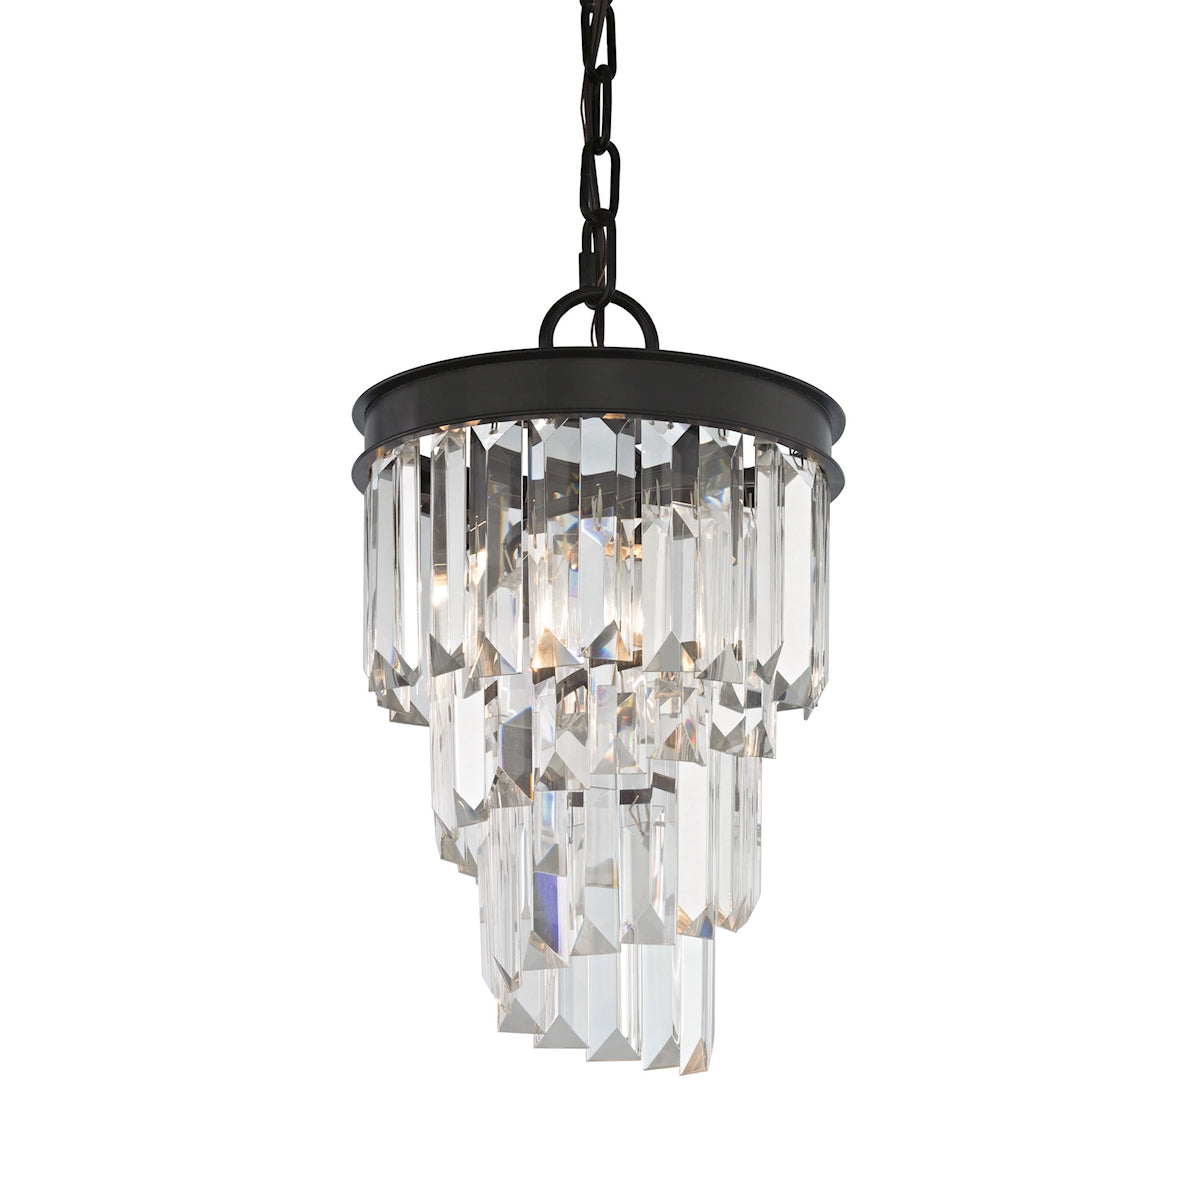 ELK Lighting 14216/1 Palacial 1-Light Mini Pendant in Oil Rubbed Bronze with Clear Crystal